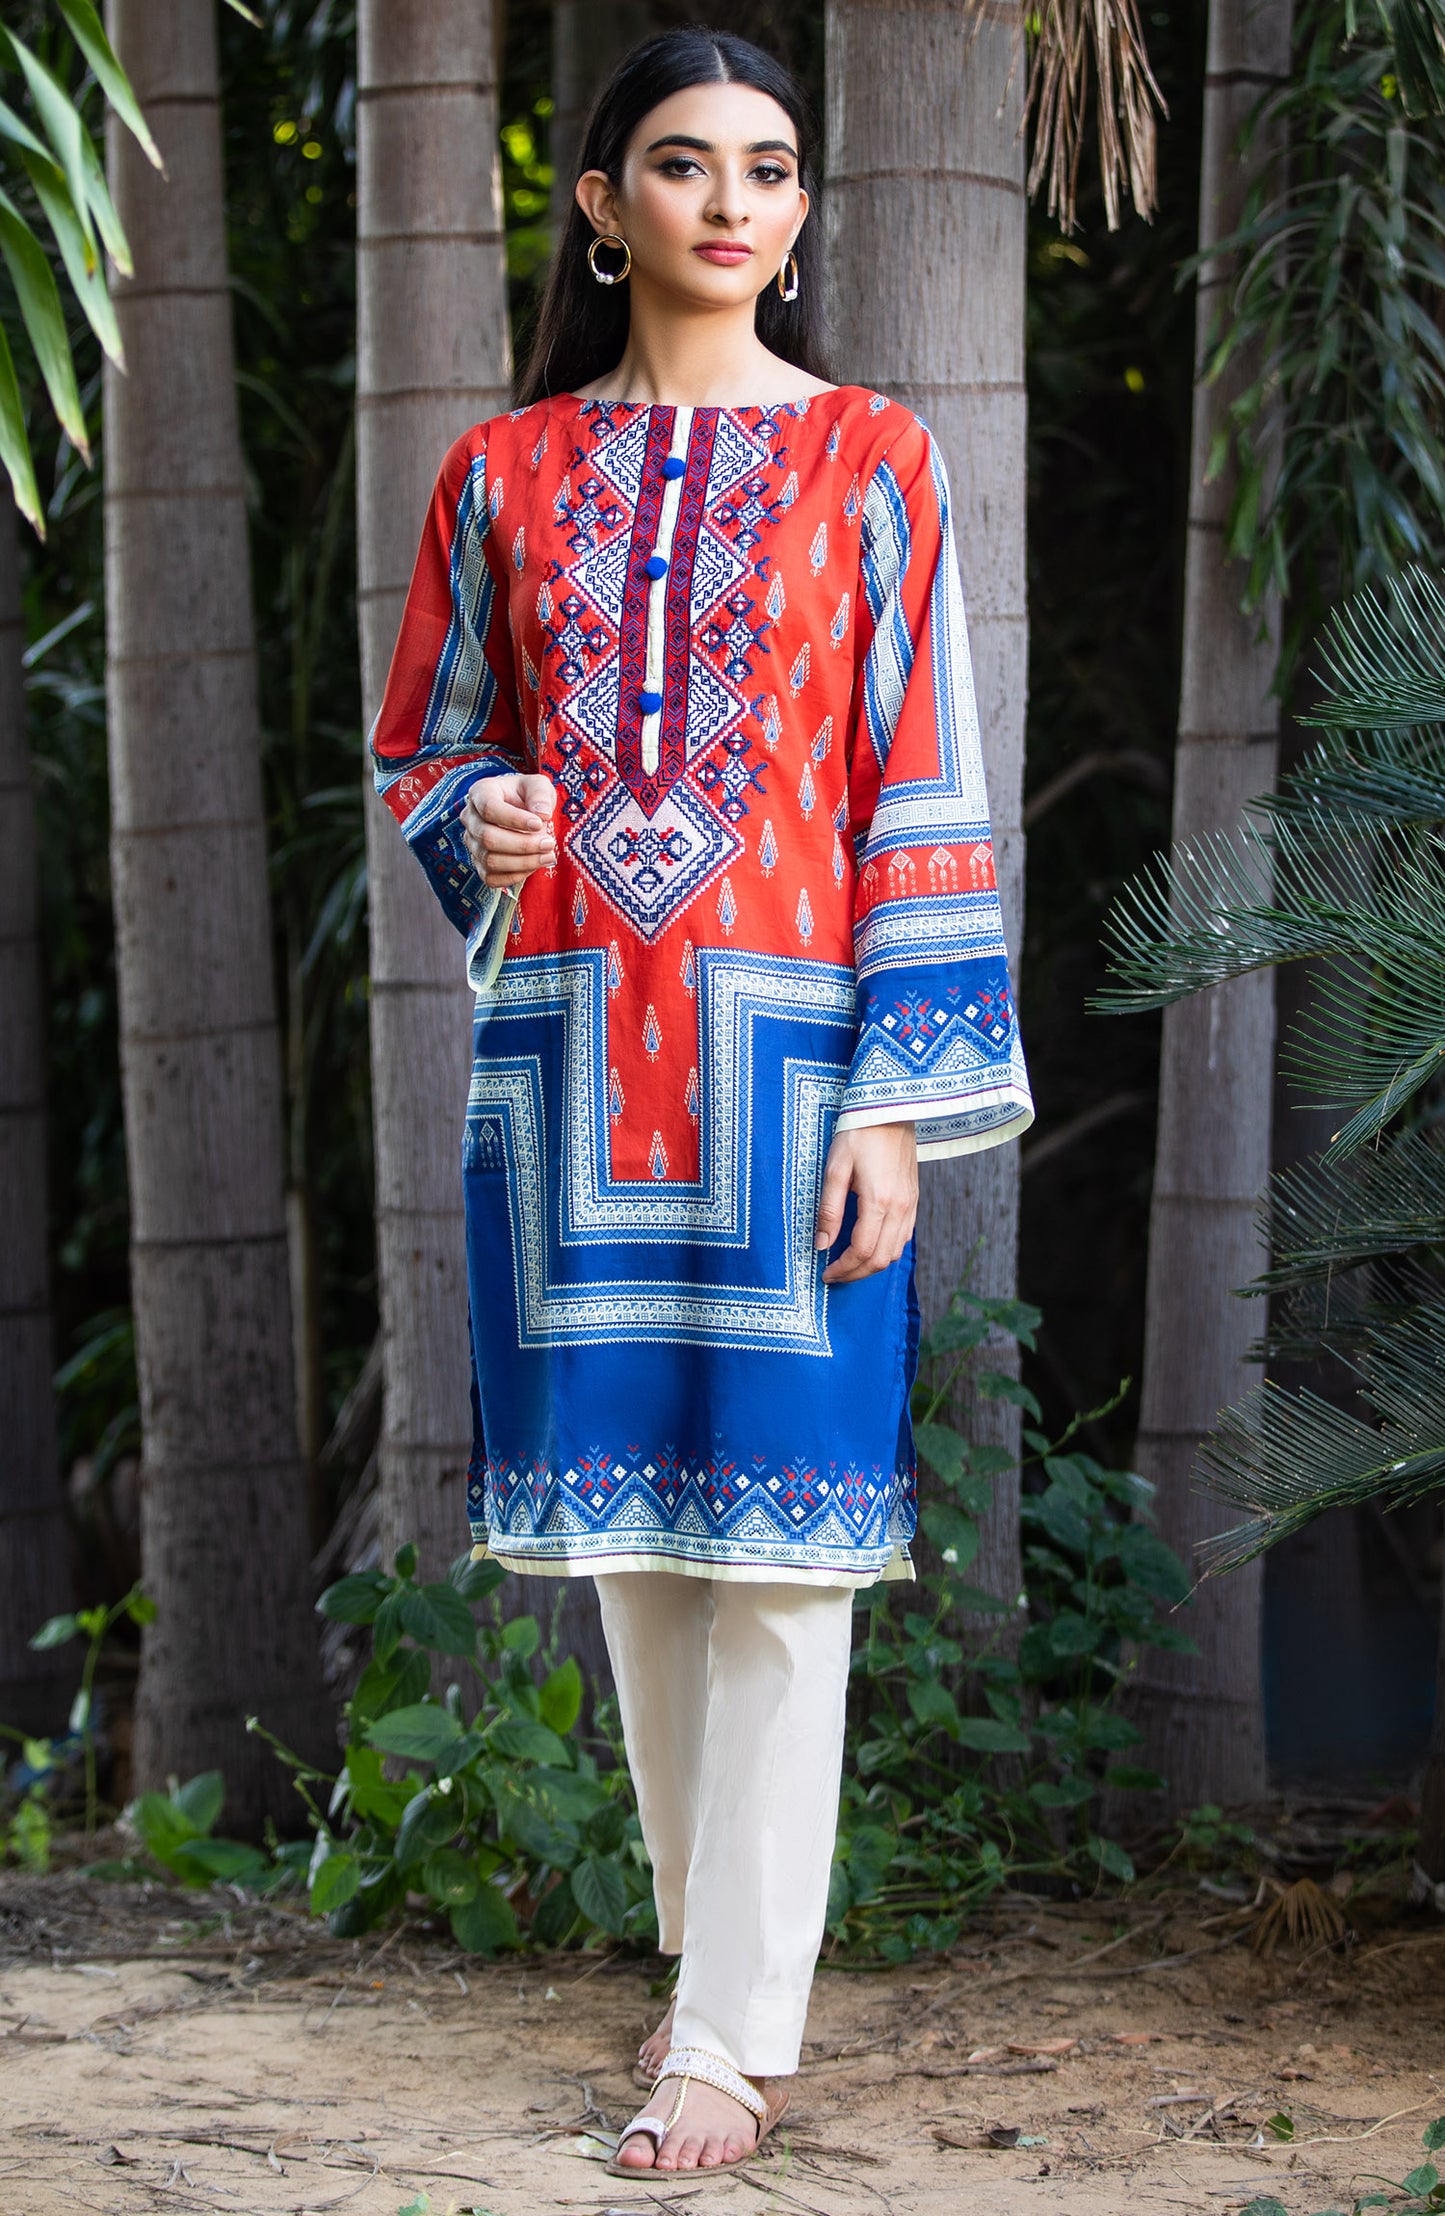 Stitched 1 Piece Embroidered Cambric Shirt (NRD-325 RED BLUE)